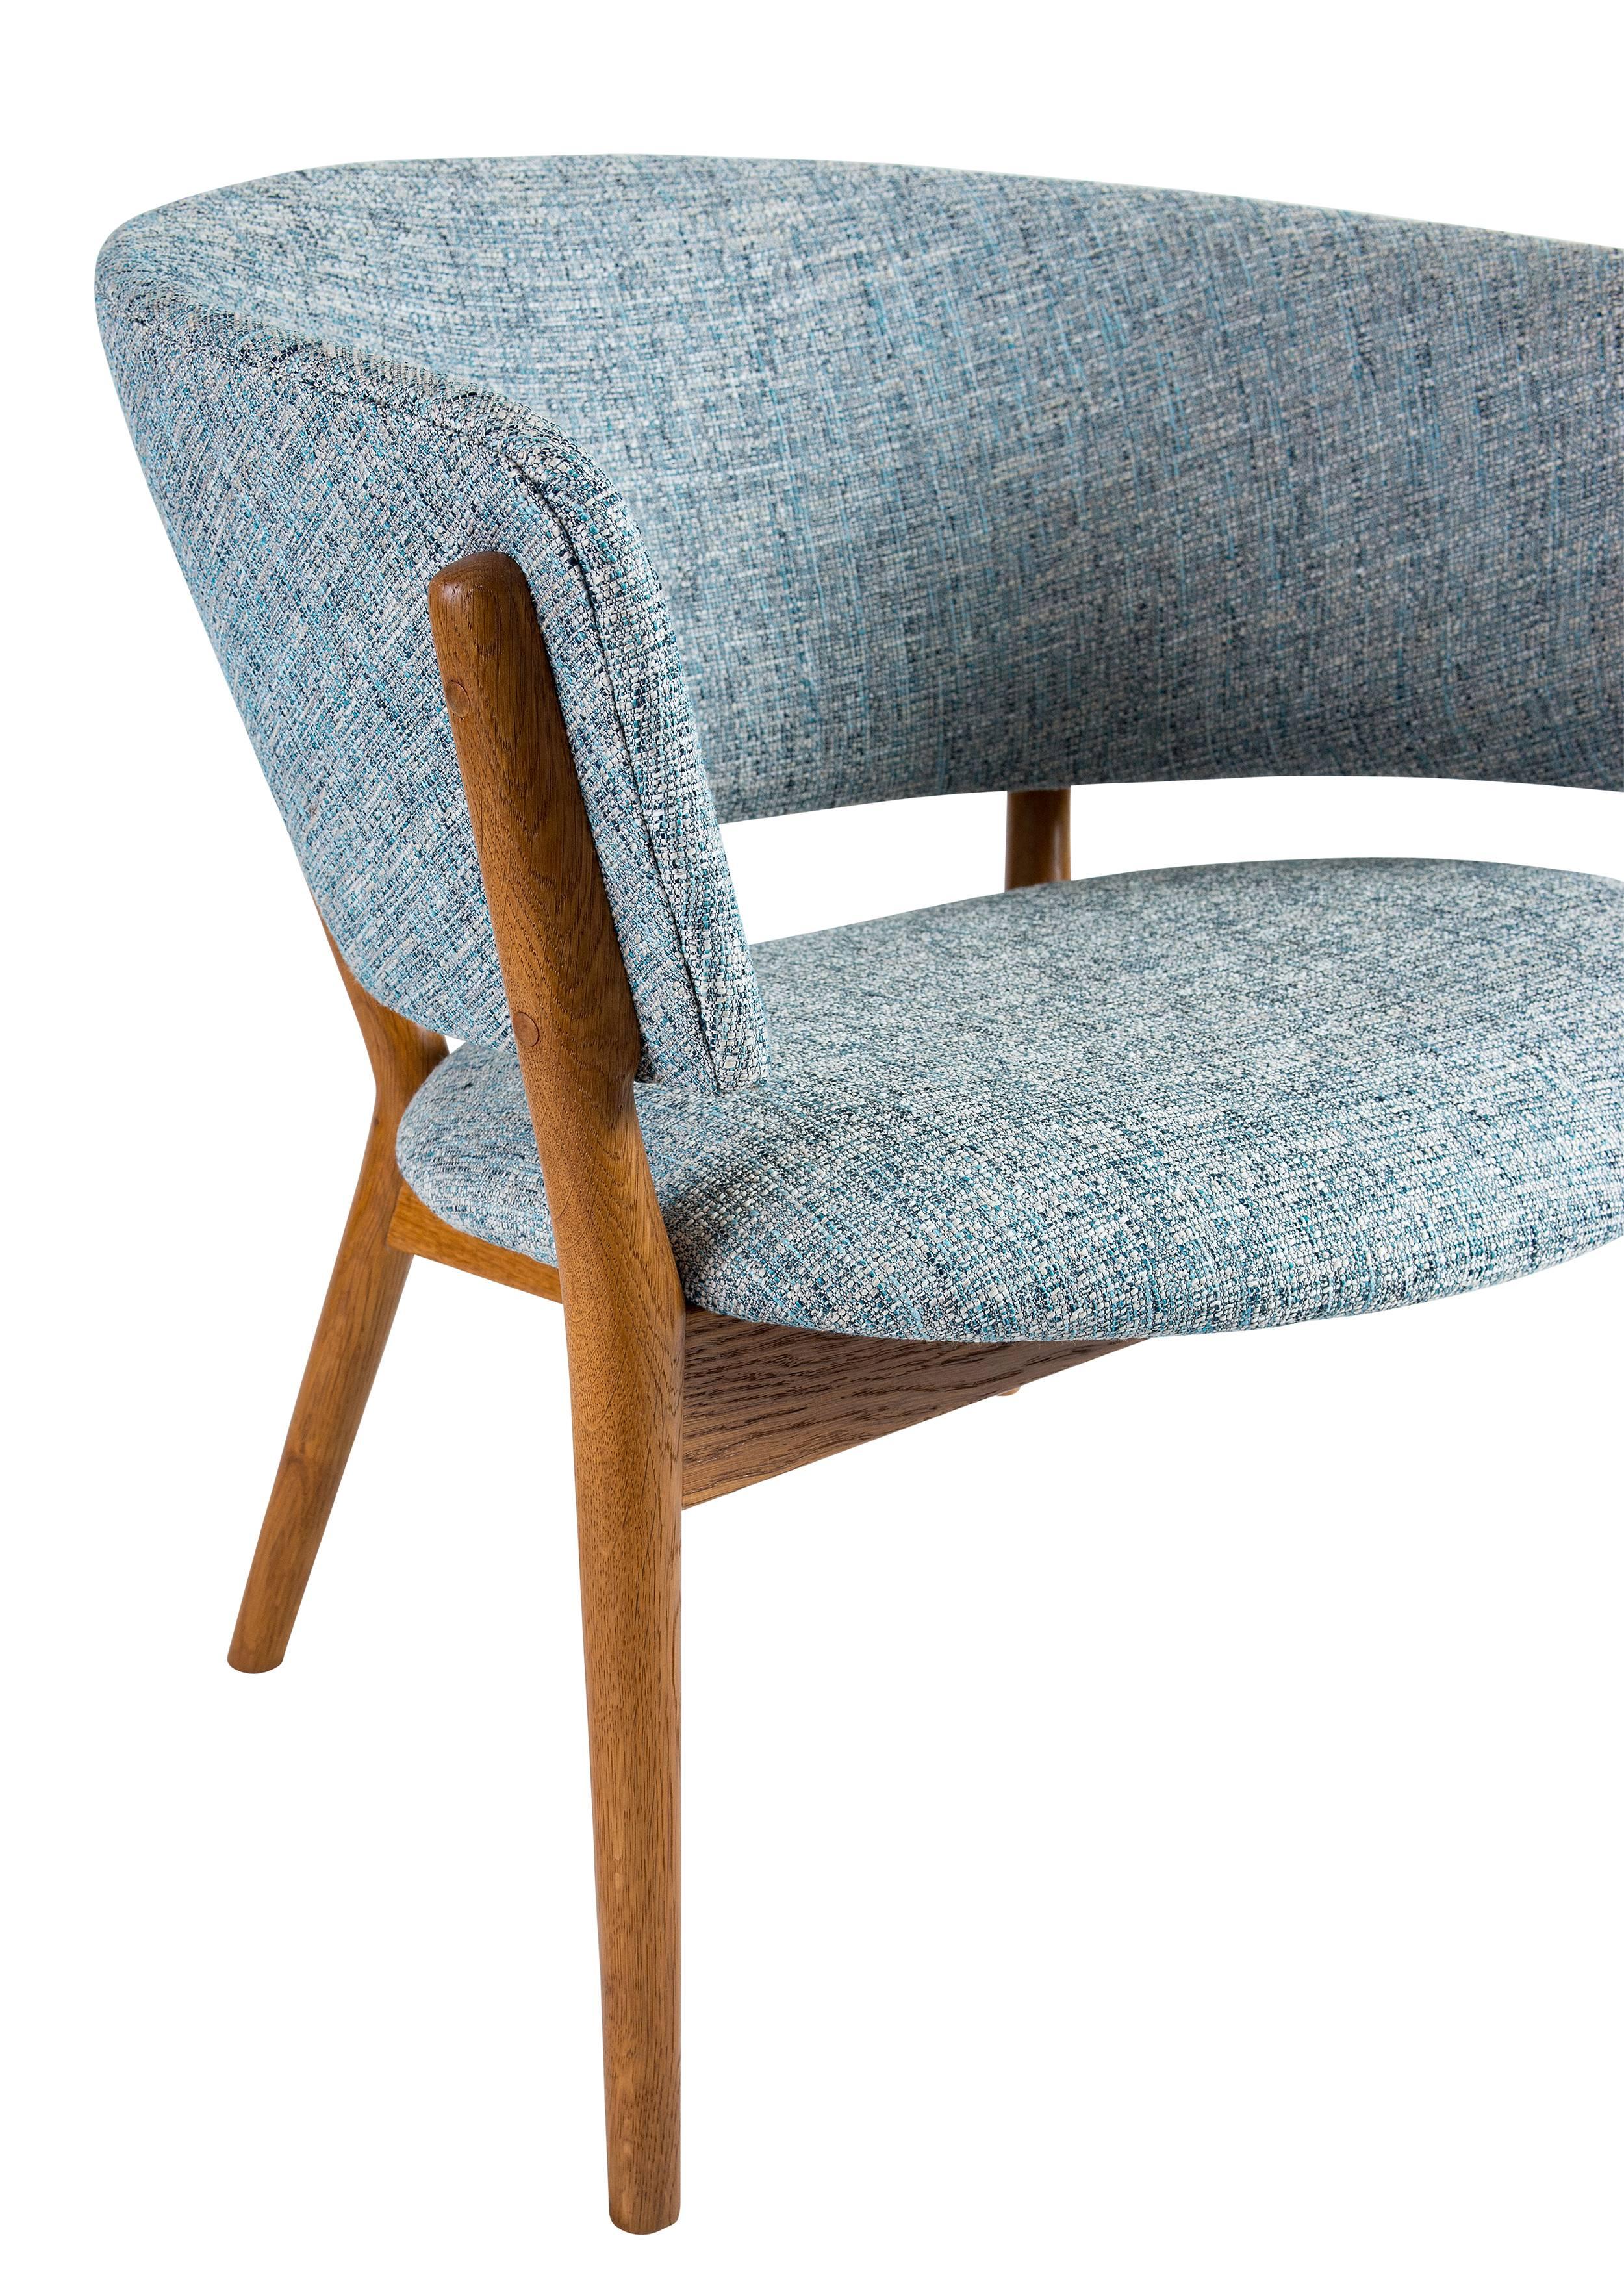 Mid-20th Century Nanna Ditzel Lounge Chair For Sale